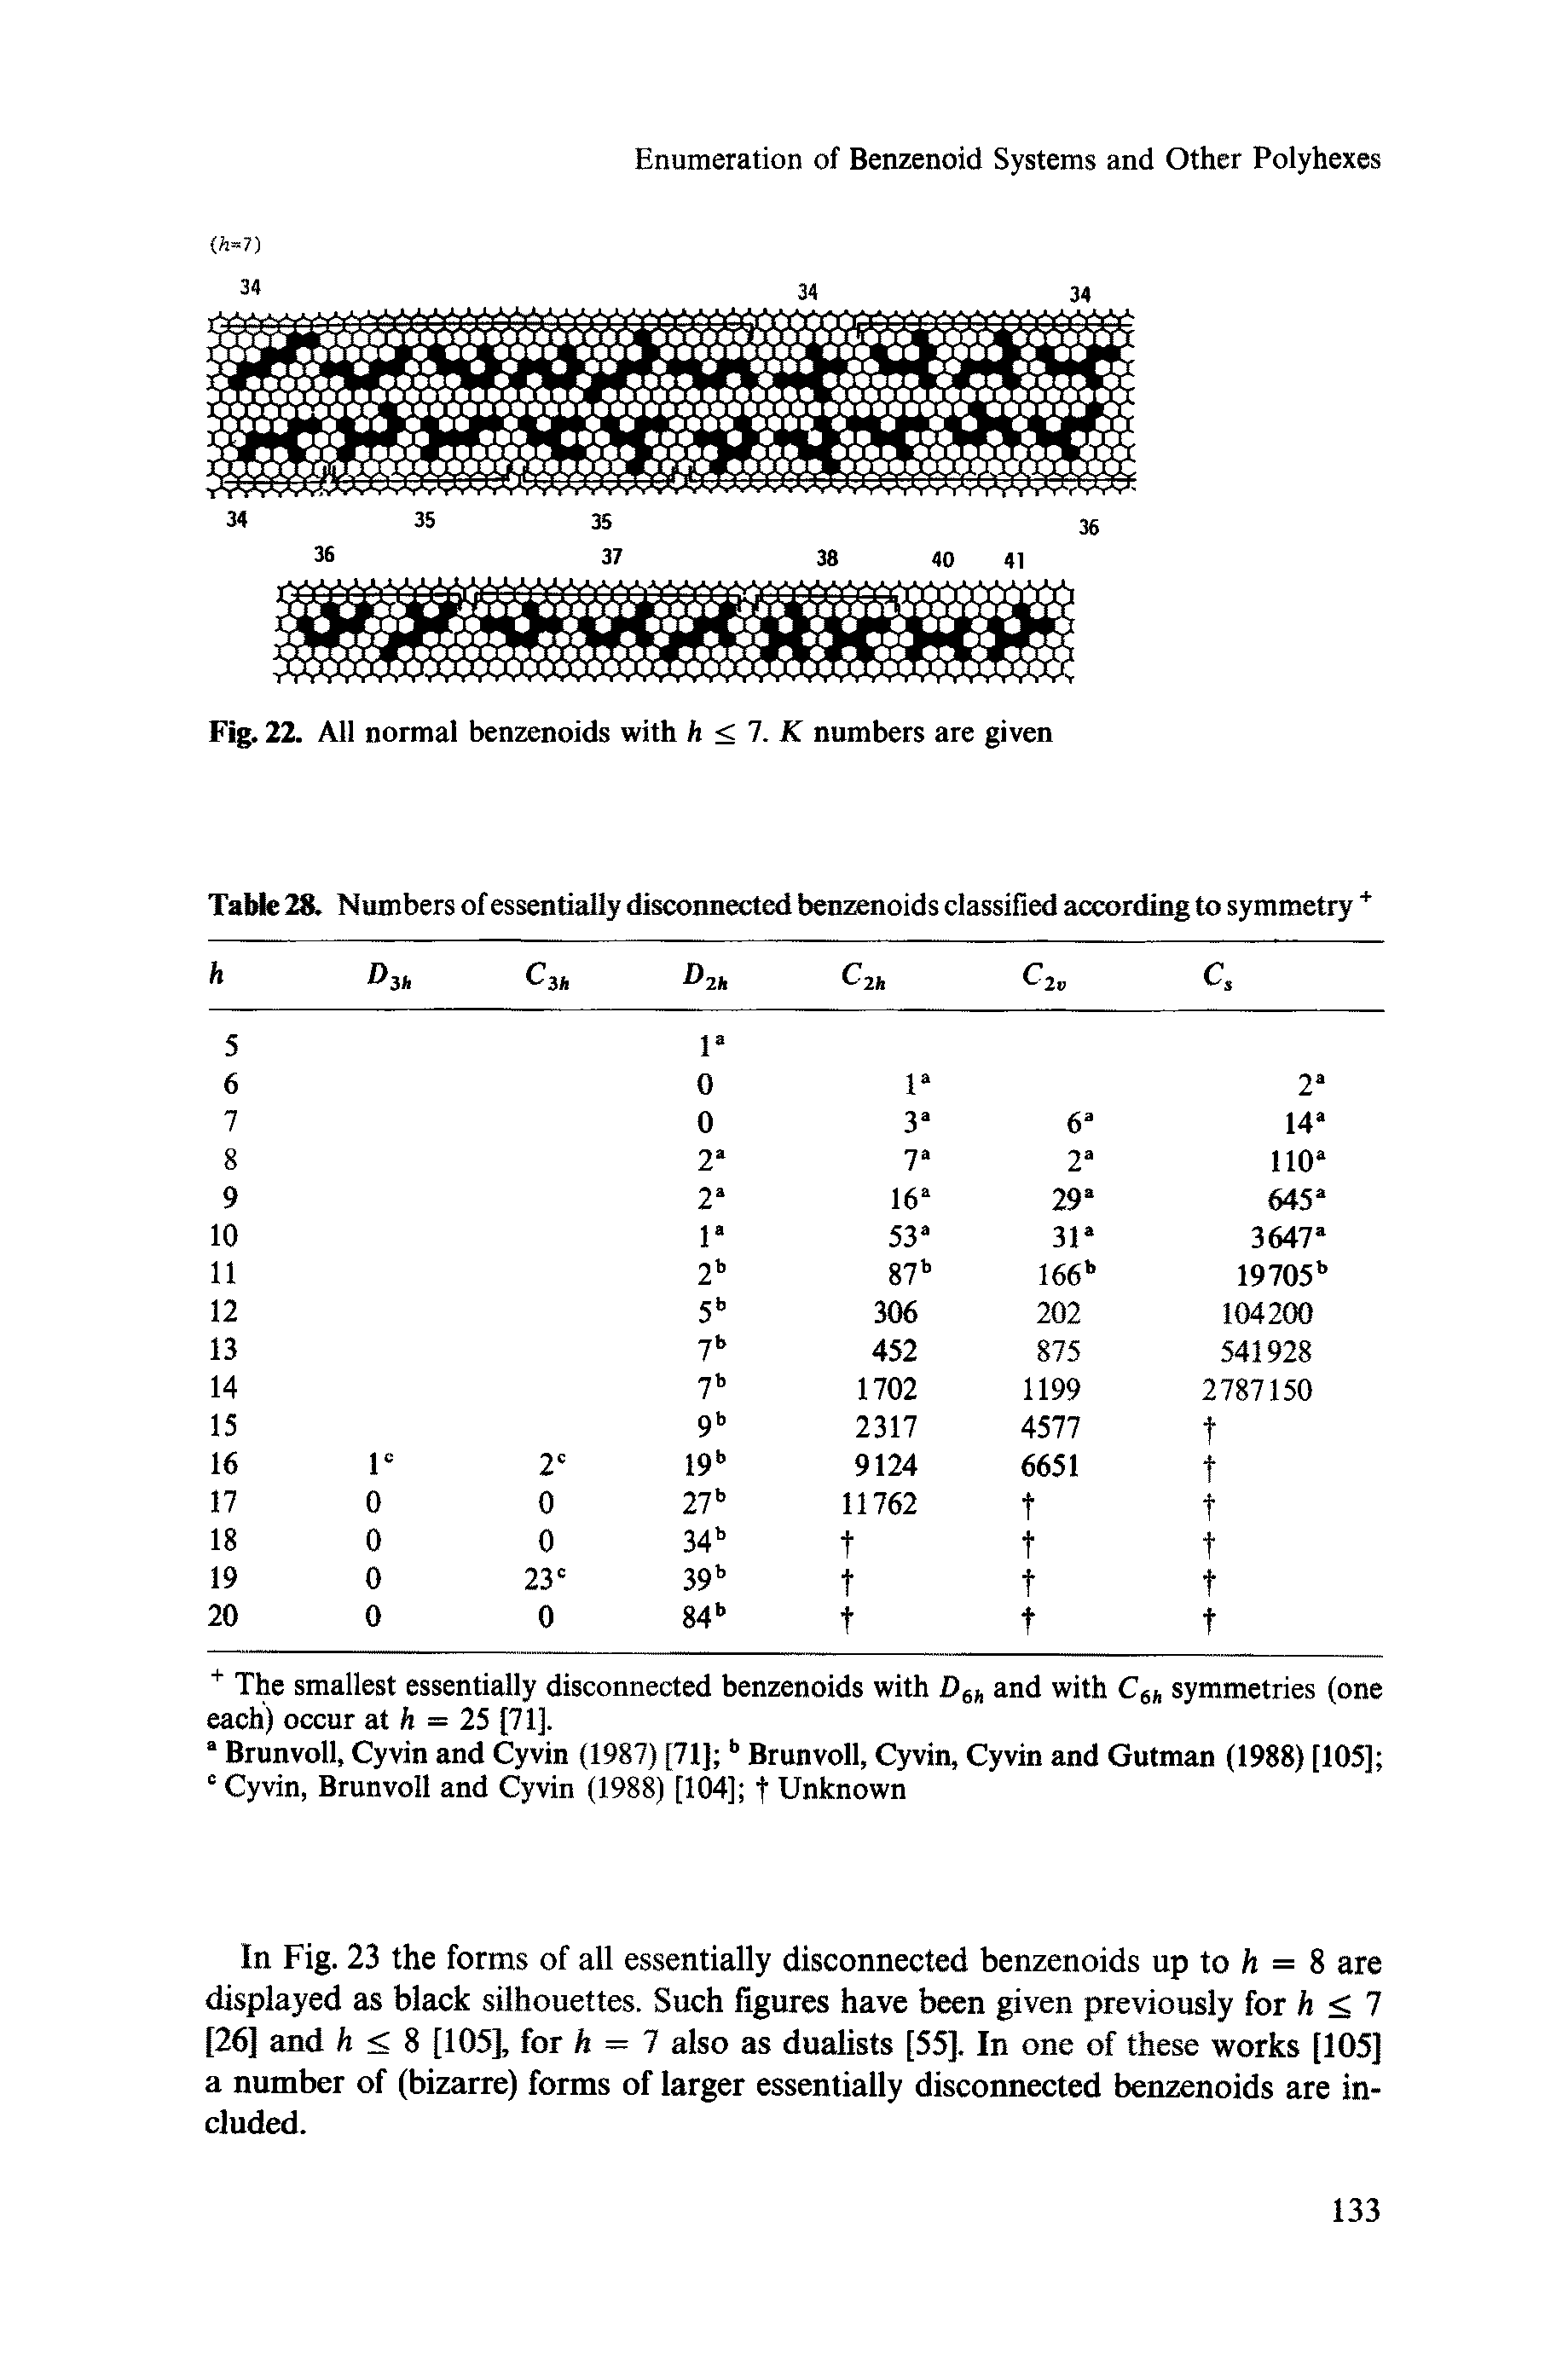 Table 28. Numbers of essentially disconnected benzenoids classified according to symmetry +...